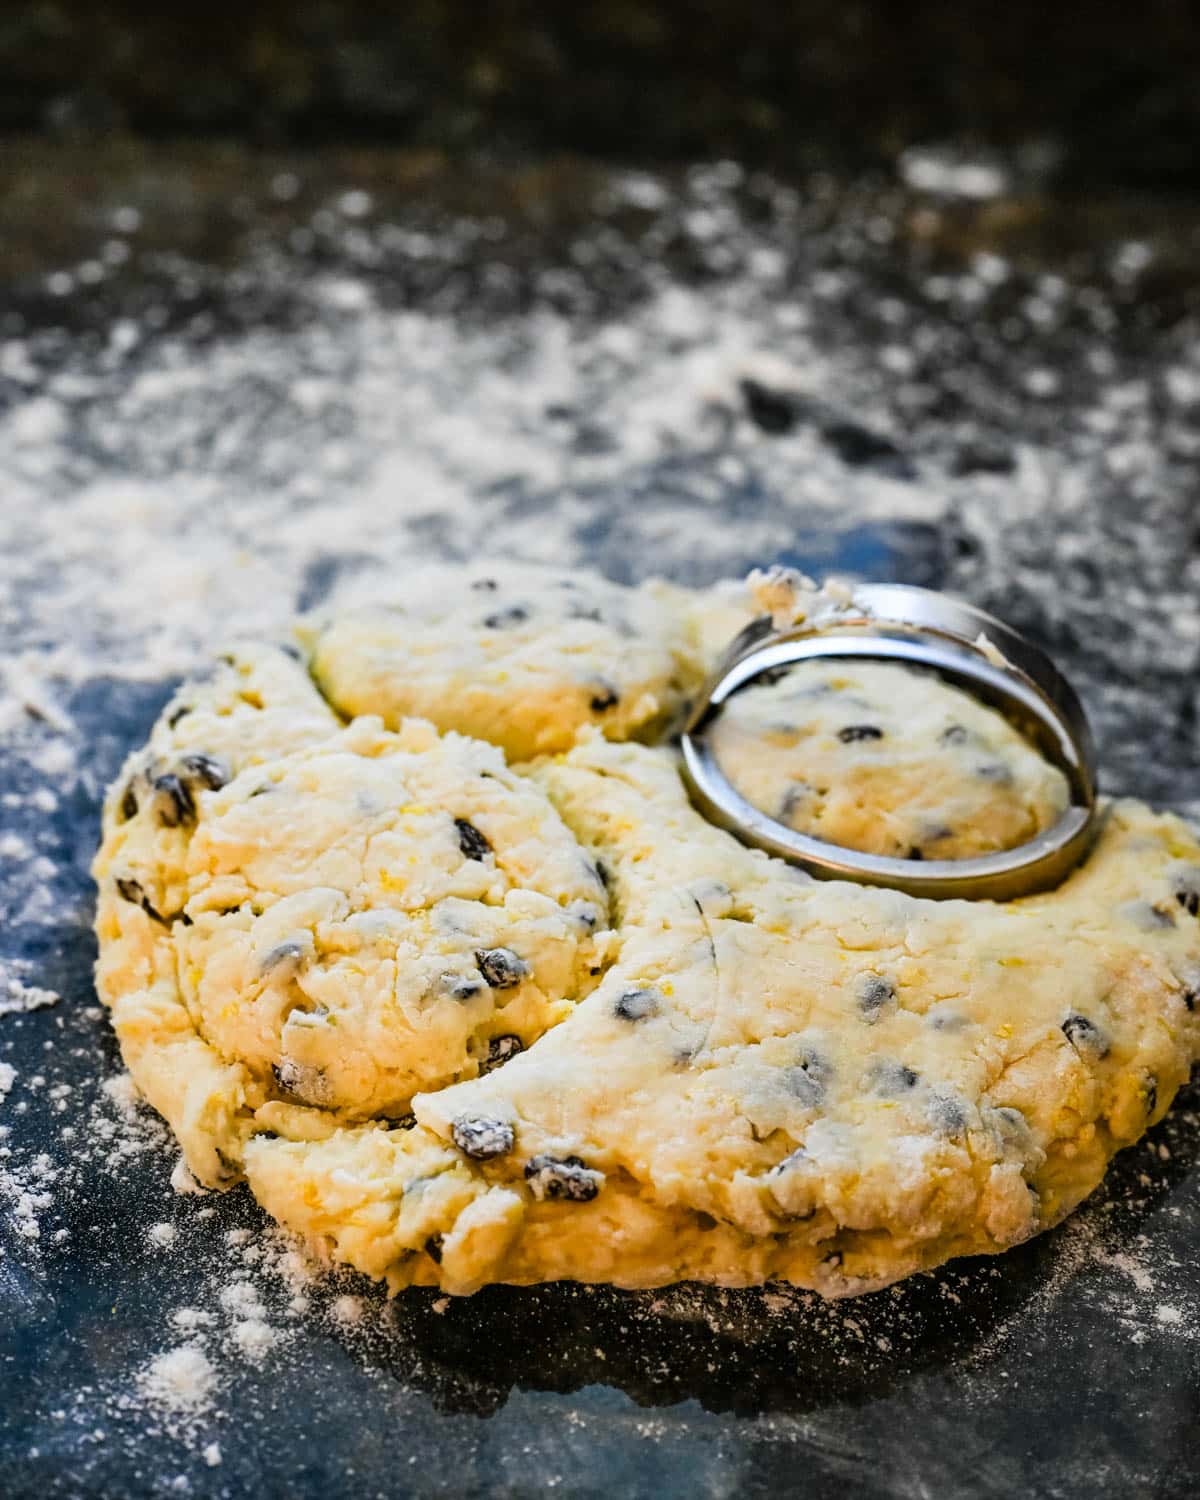 Cutting the scones with a biscuit cutter.